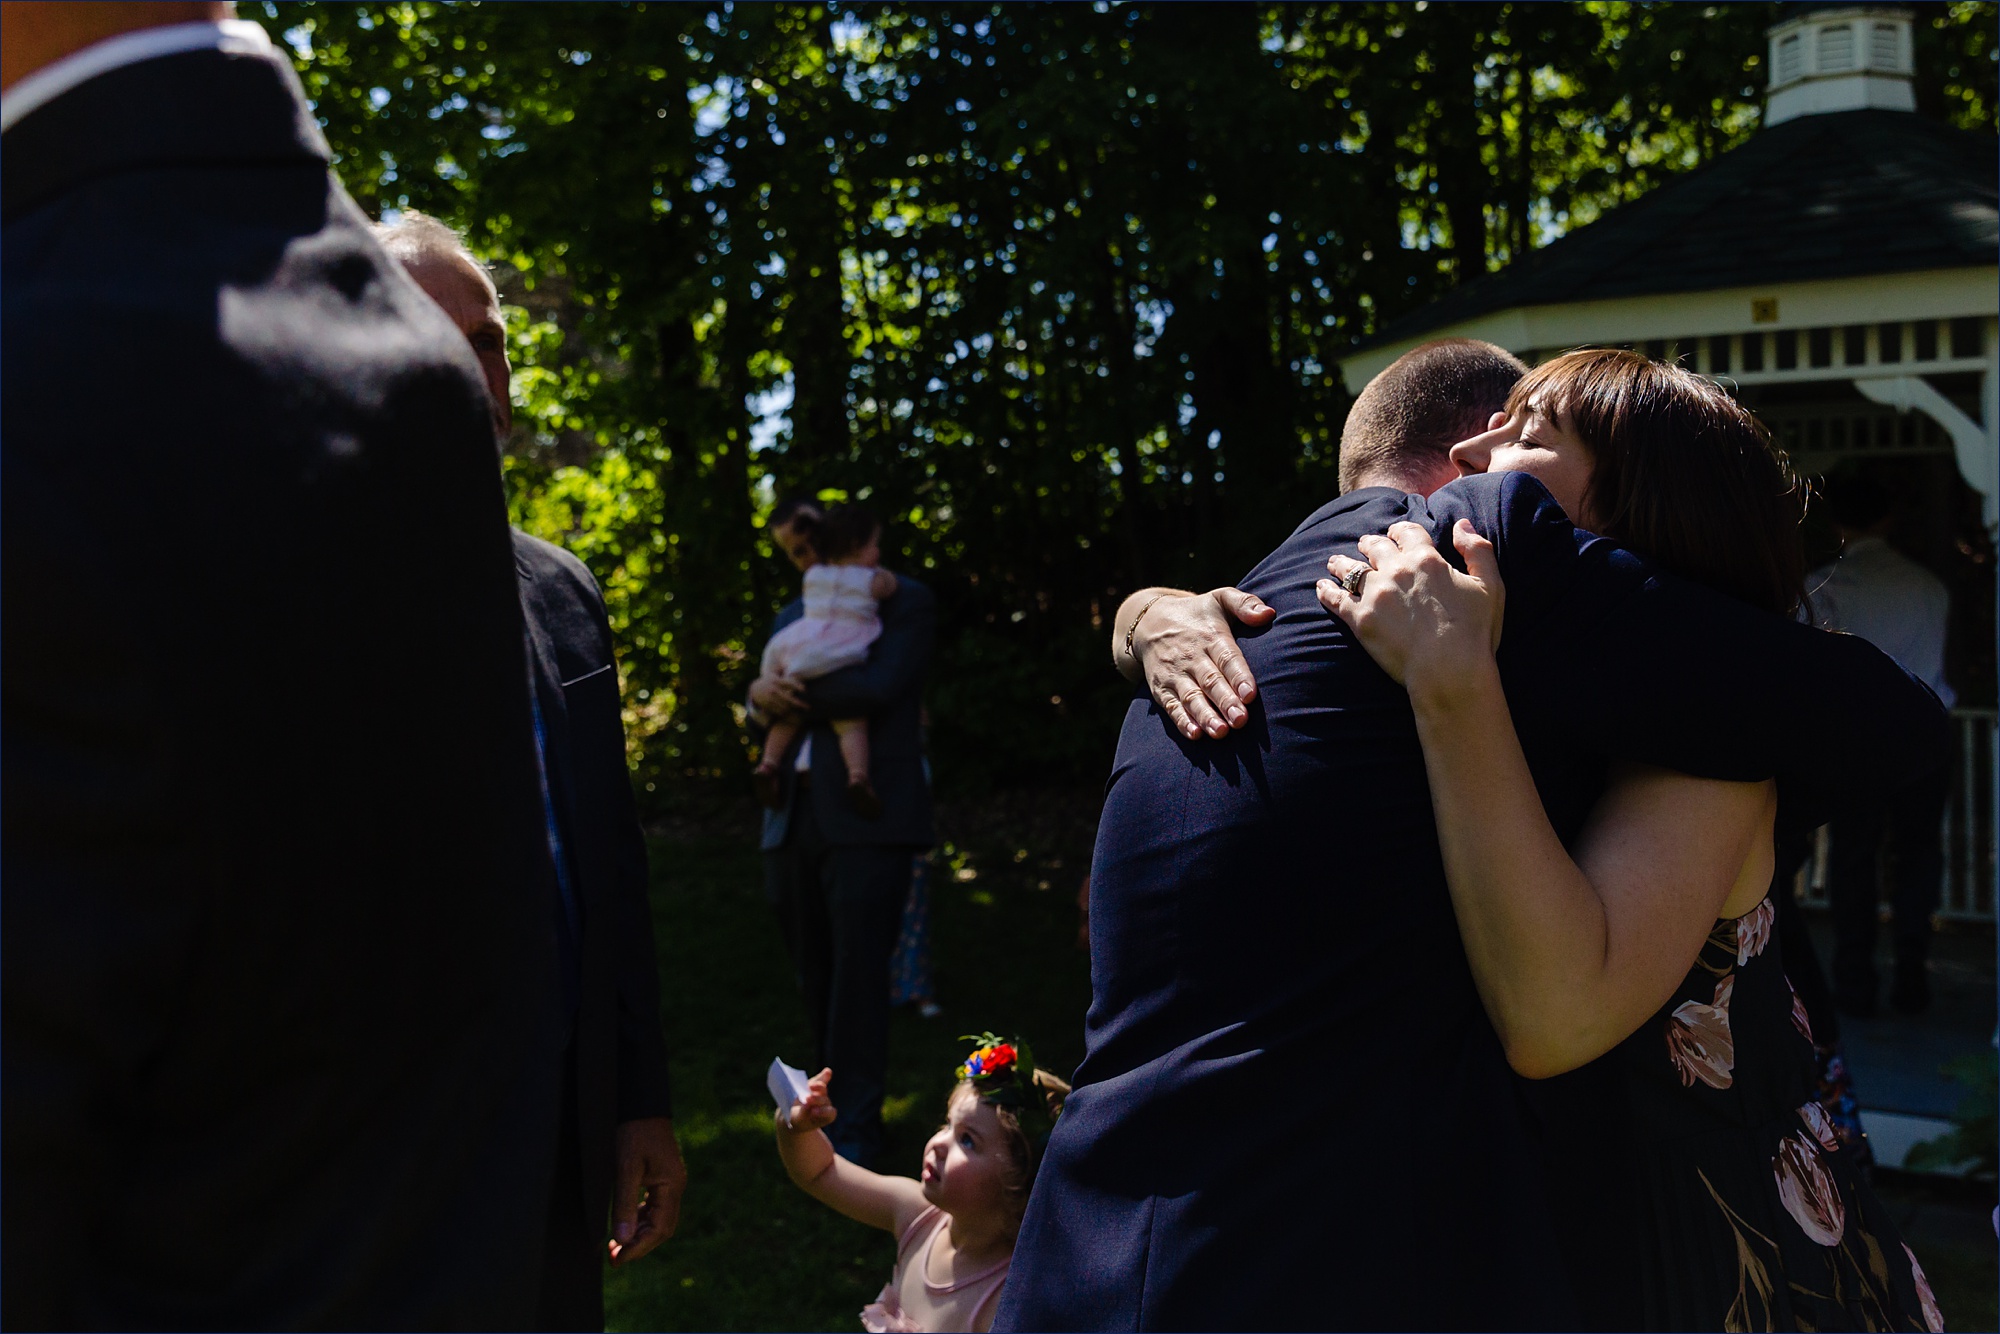 The groom hugs his sister after his outdoor wedding day in the sun